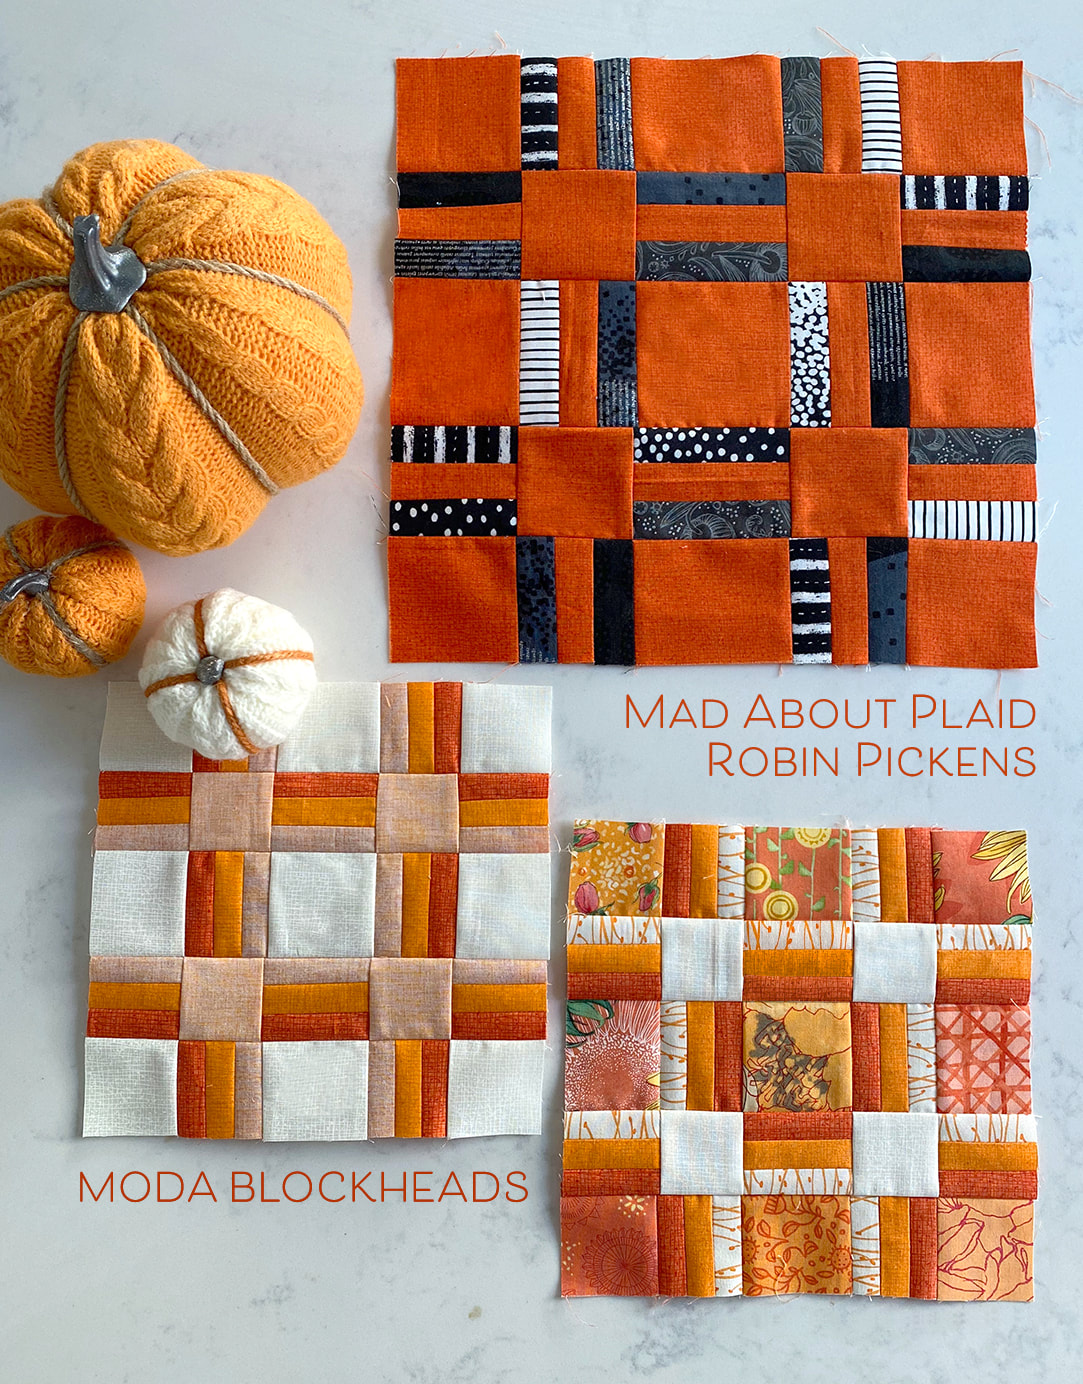 Mad About Plaid by Robin Pickens in Thatched and scrappy quilt blocks3